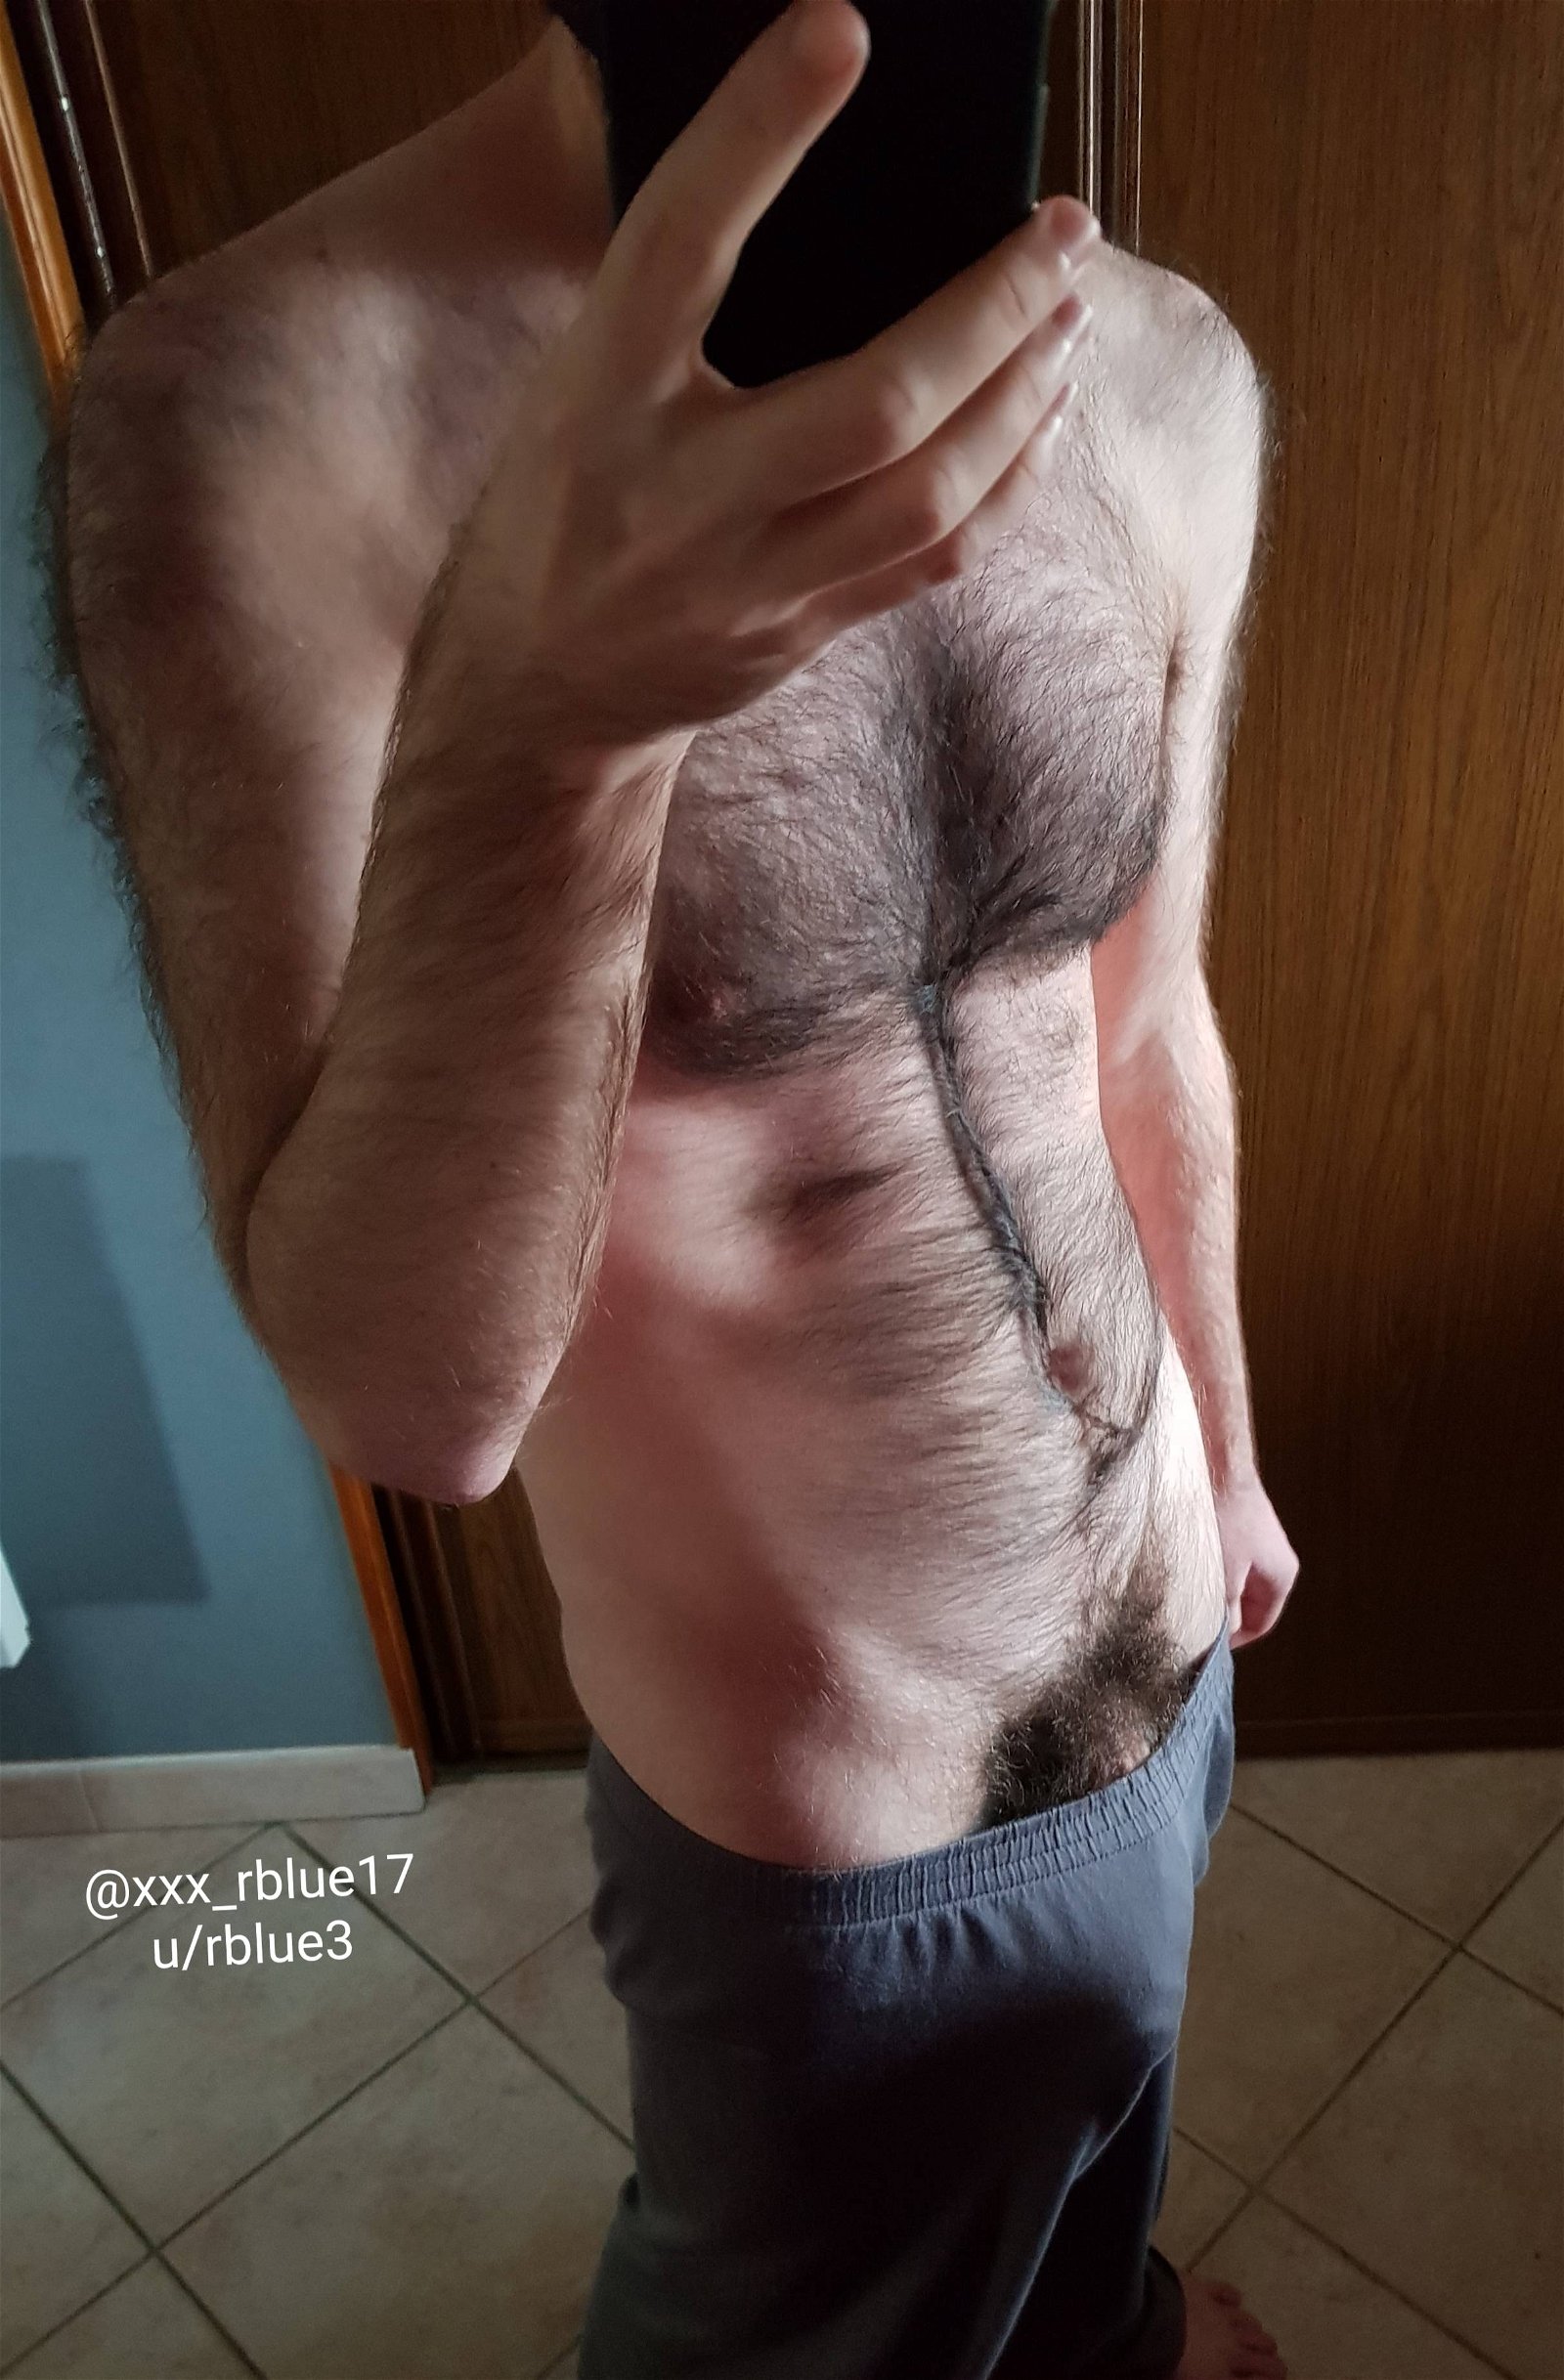 Photo by rblue with the username @rblue17,  December 21, 2019 at 12:33 PM. The post is about the topic GayExTumblr and the text says 'Please look at my hairy body 😇 https://i.imgur.com/dnMFxY3.jpg'